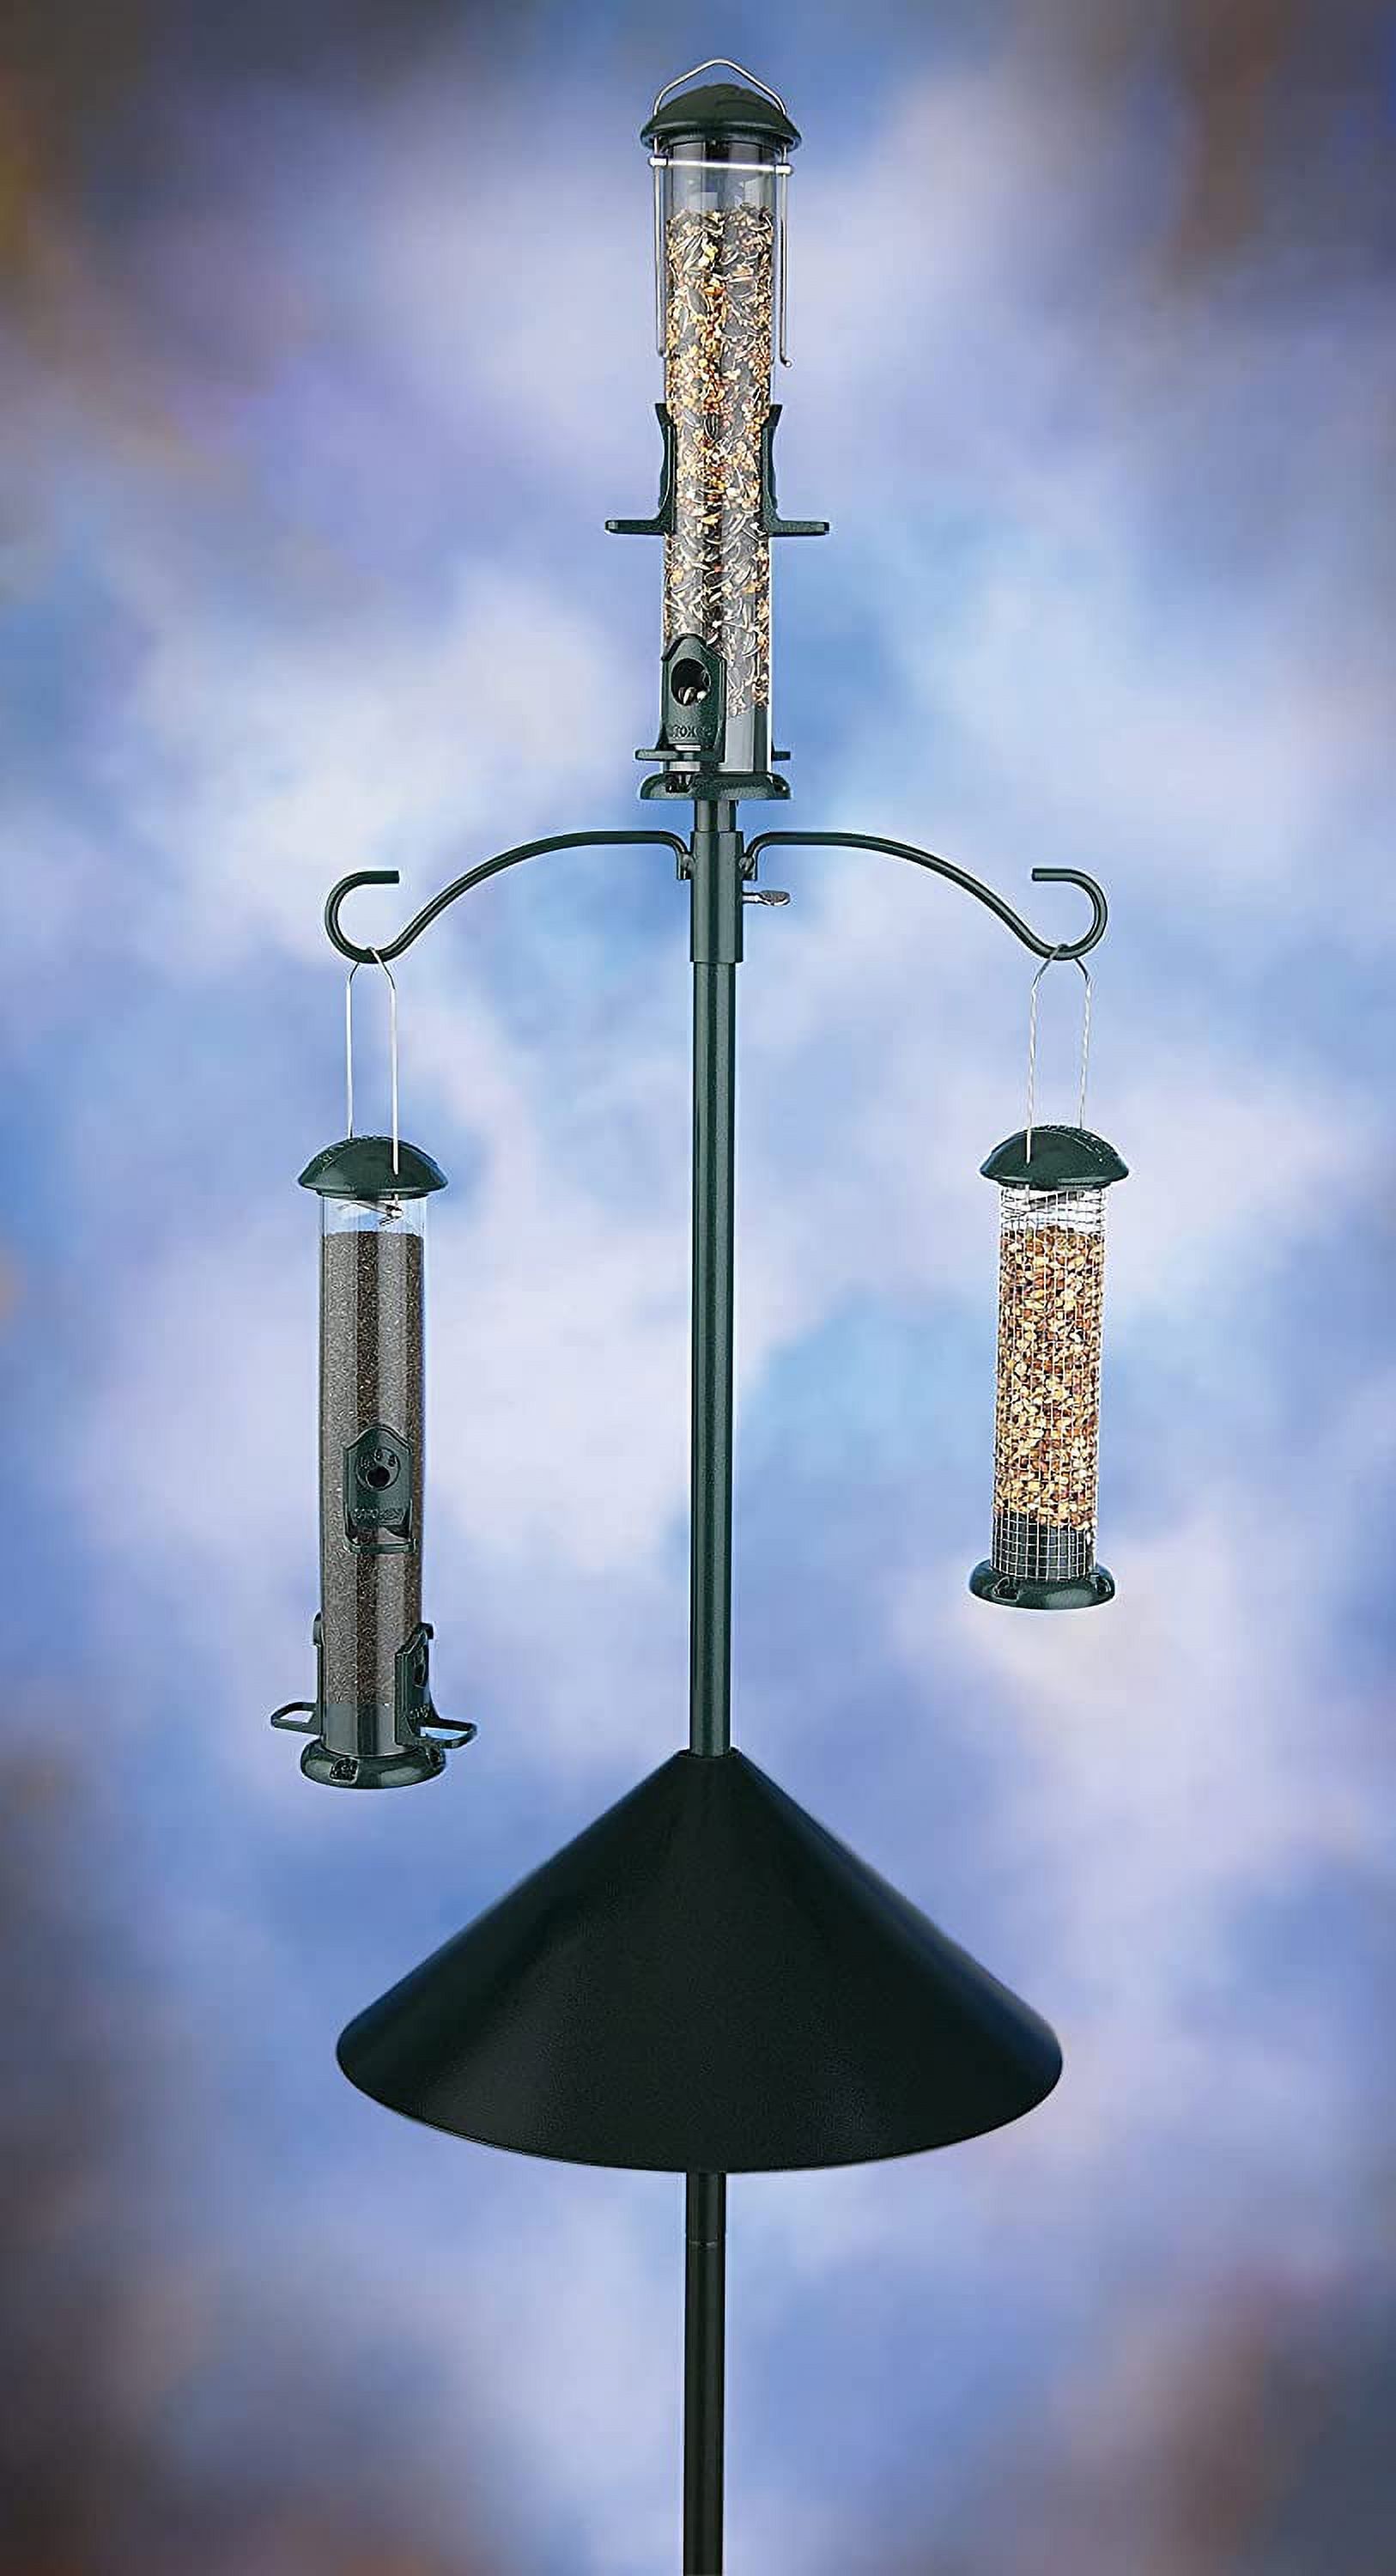 Squirrel-X Wrap Around Metal Squirrel Baffle Protects Bird Feeders from Squirrels, 18-Inches - image 2 of 5